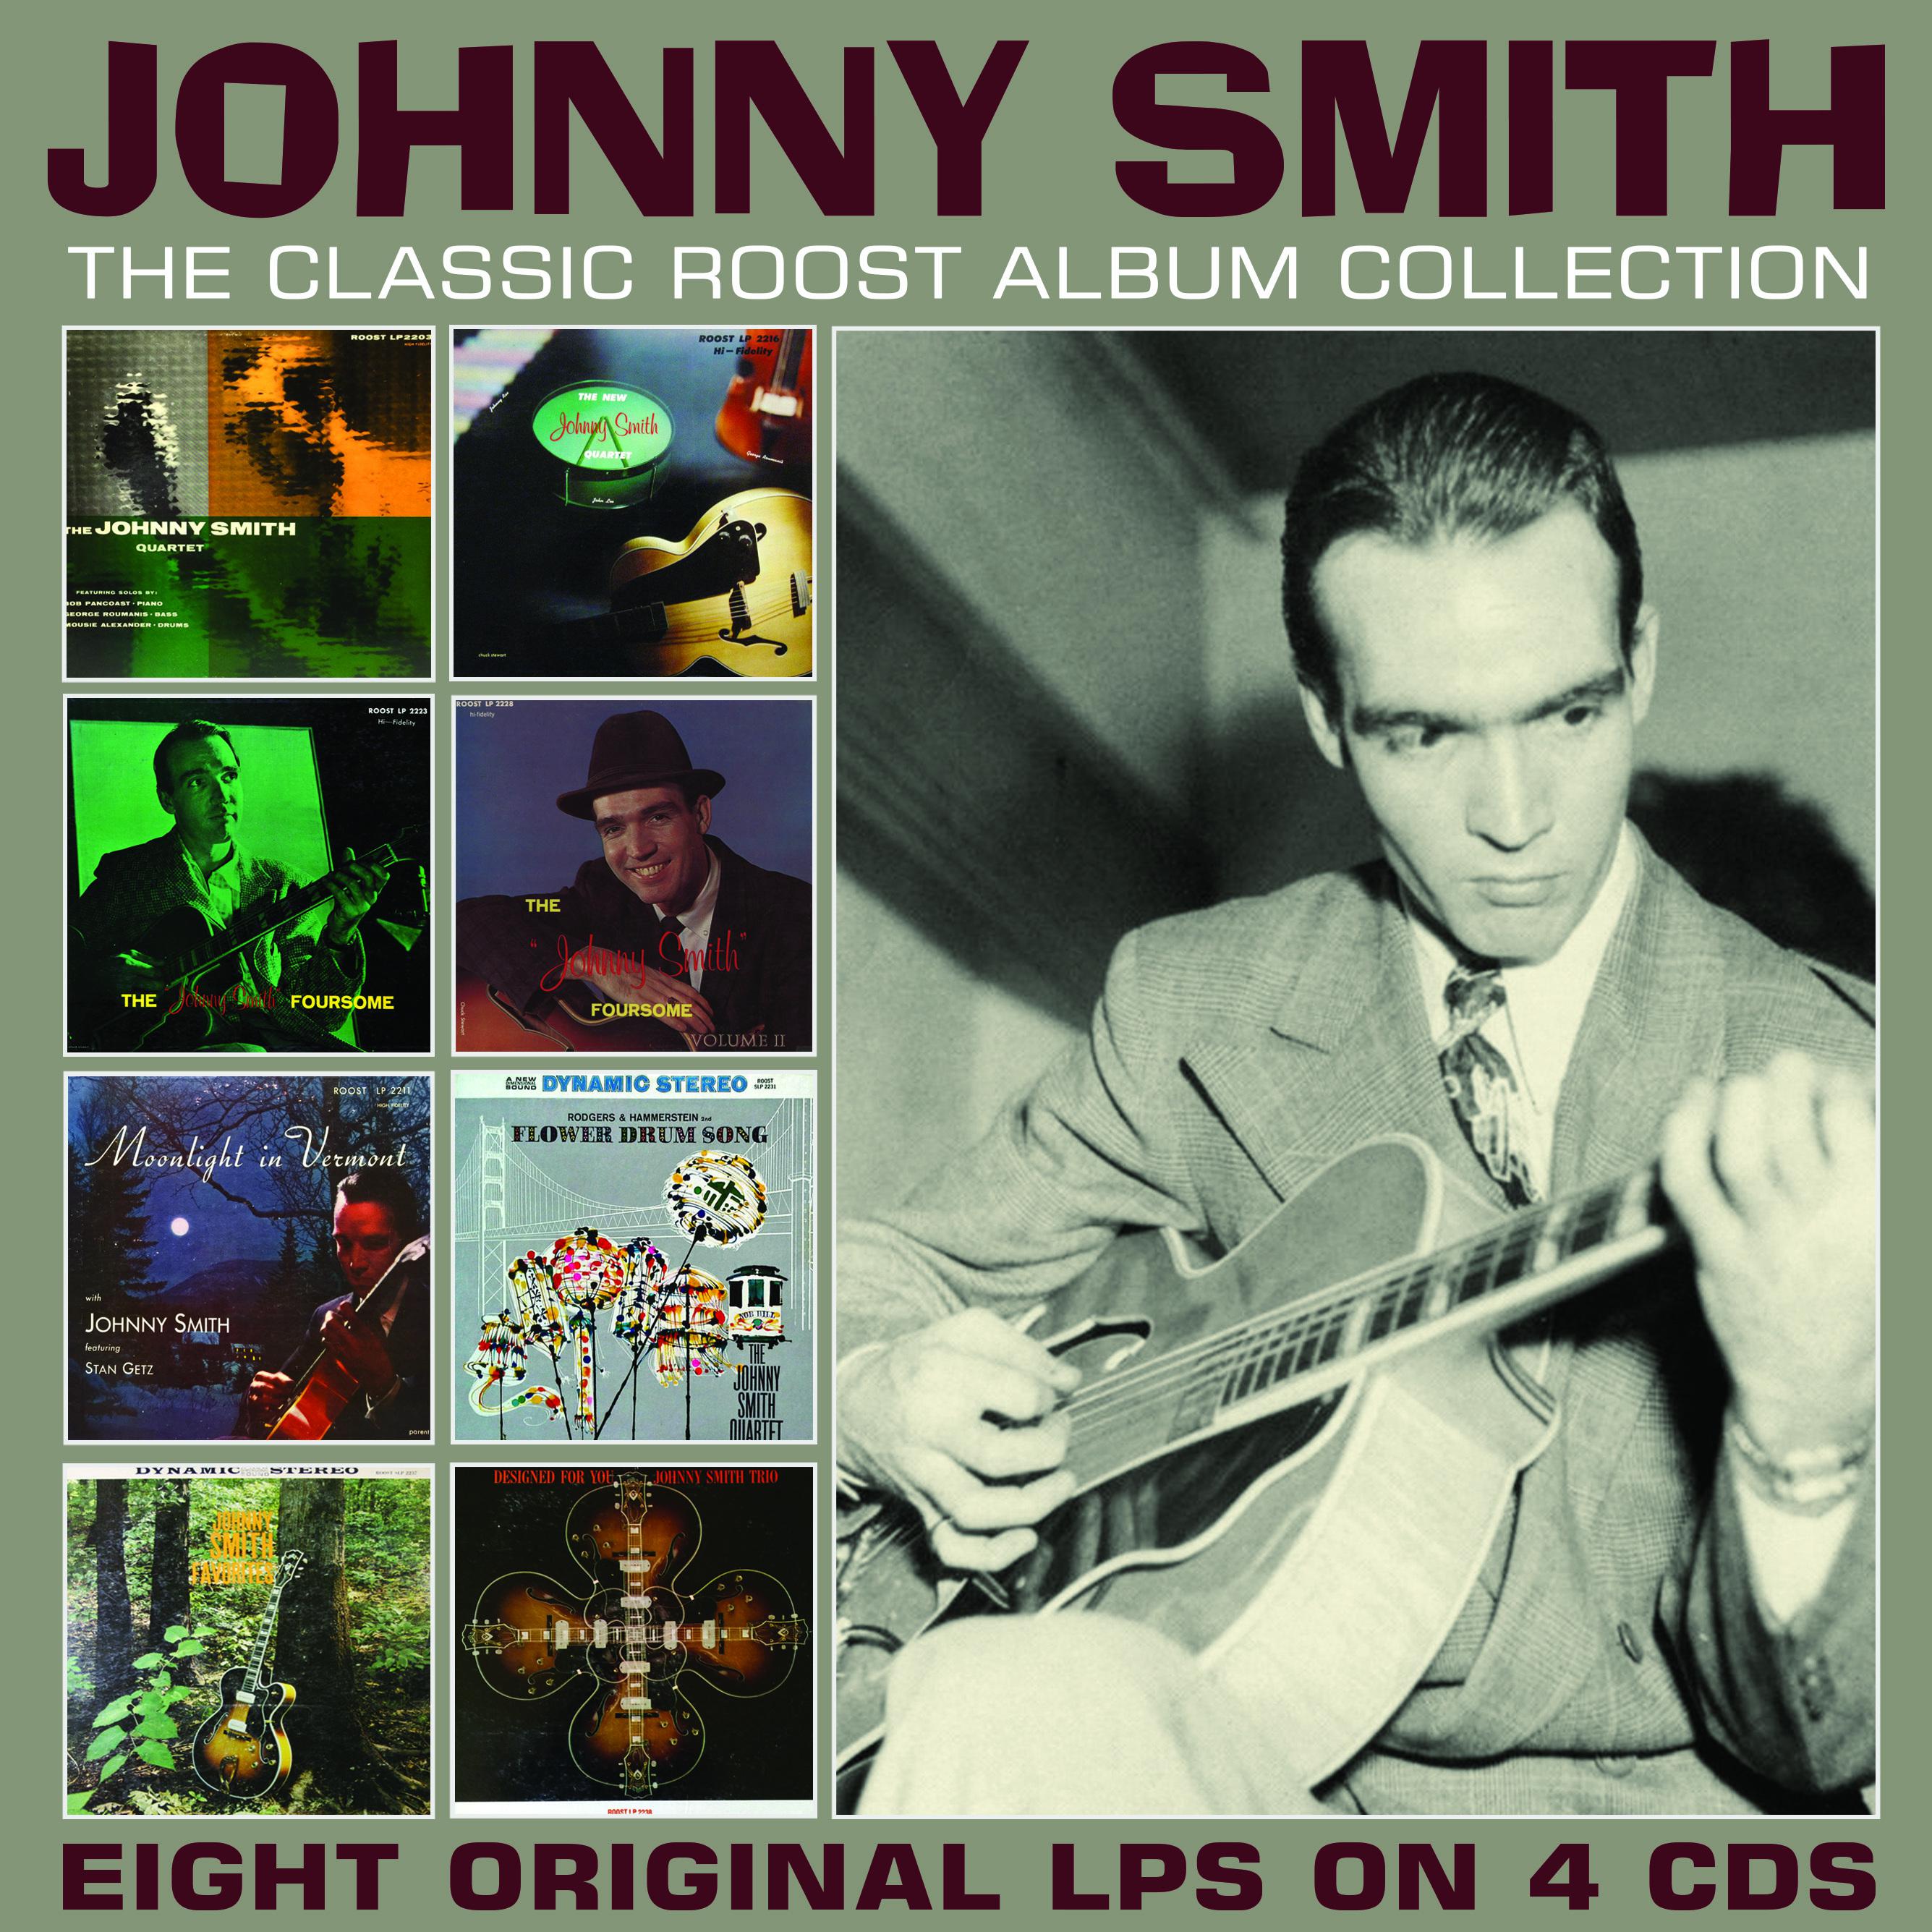 Johnny Smith - It Never Entered My Mind